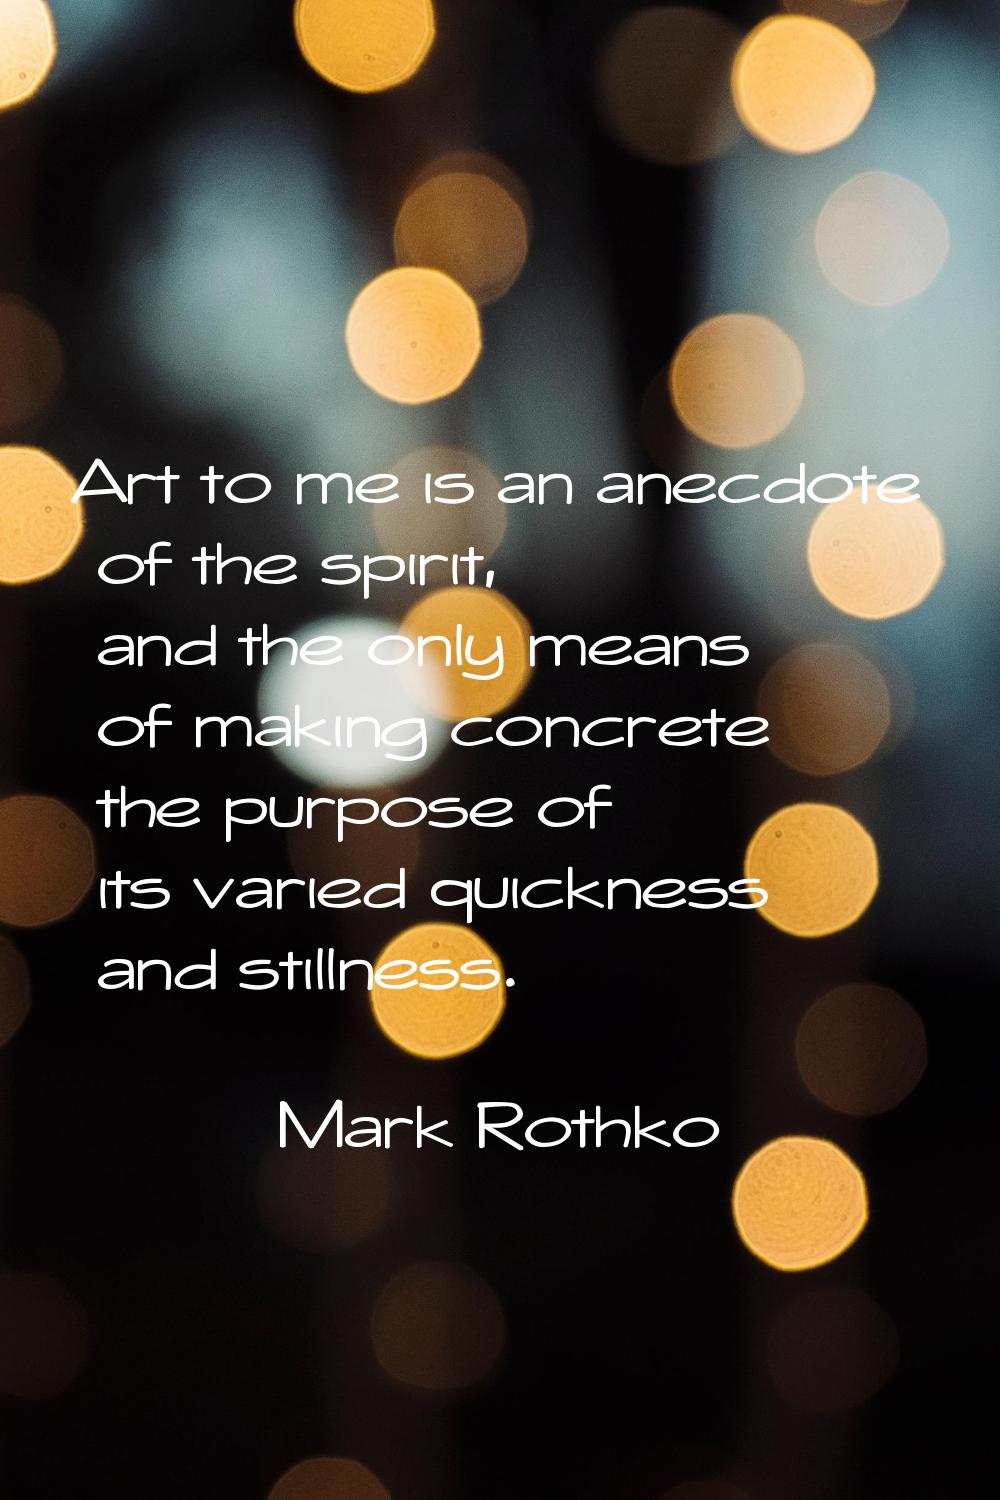 Art to me is an anecdote of the spirit, and the only means of making concrete the purpose of its va